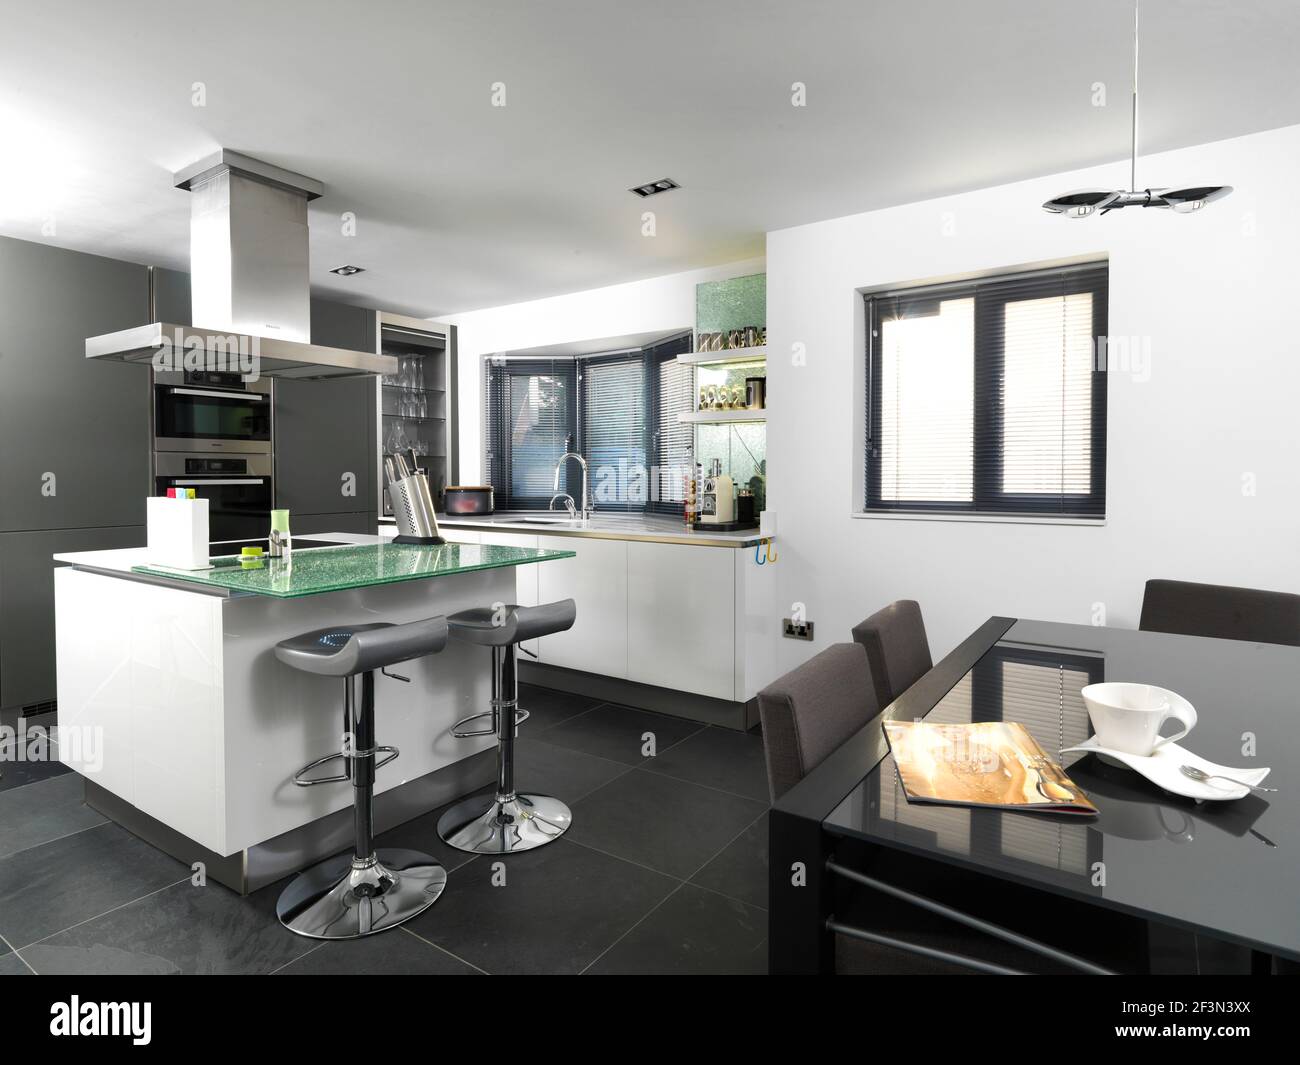 A modern open plan kitchen with central island, UK home Stock Photo